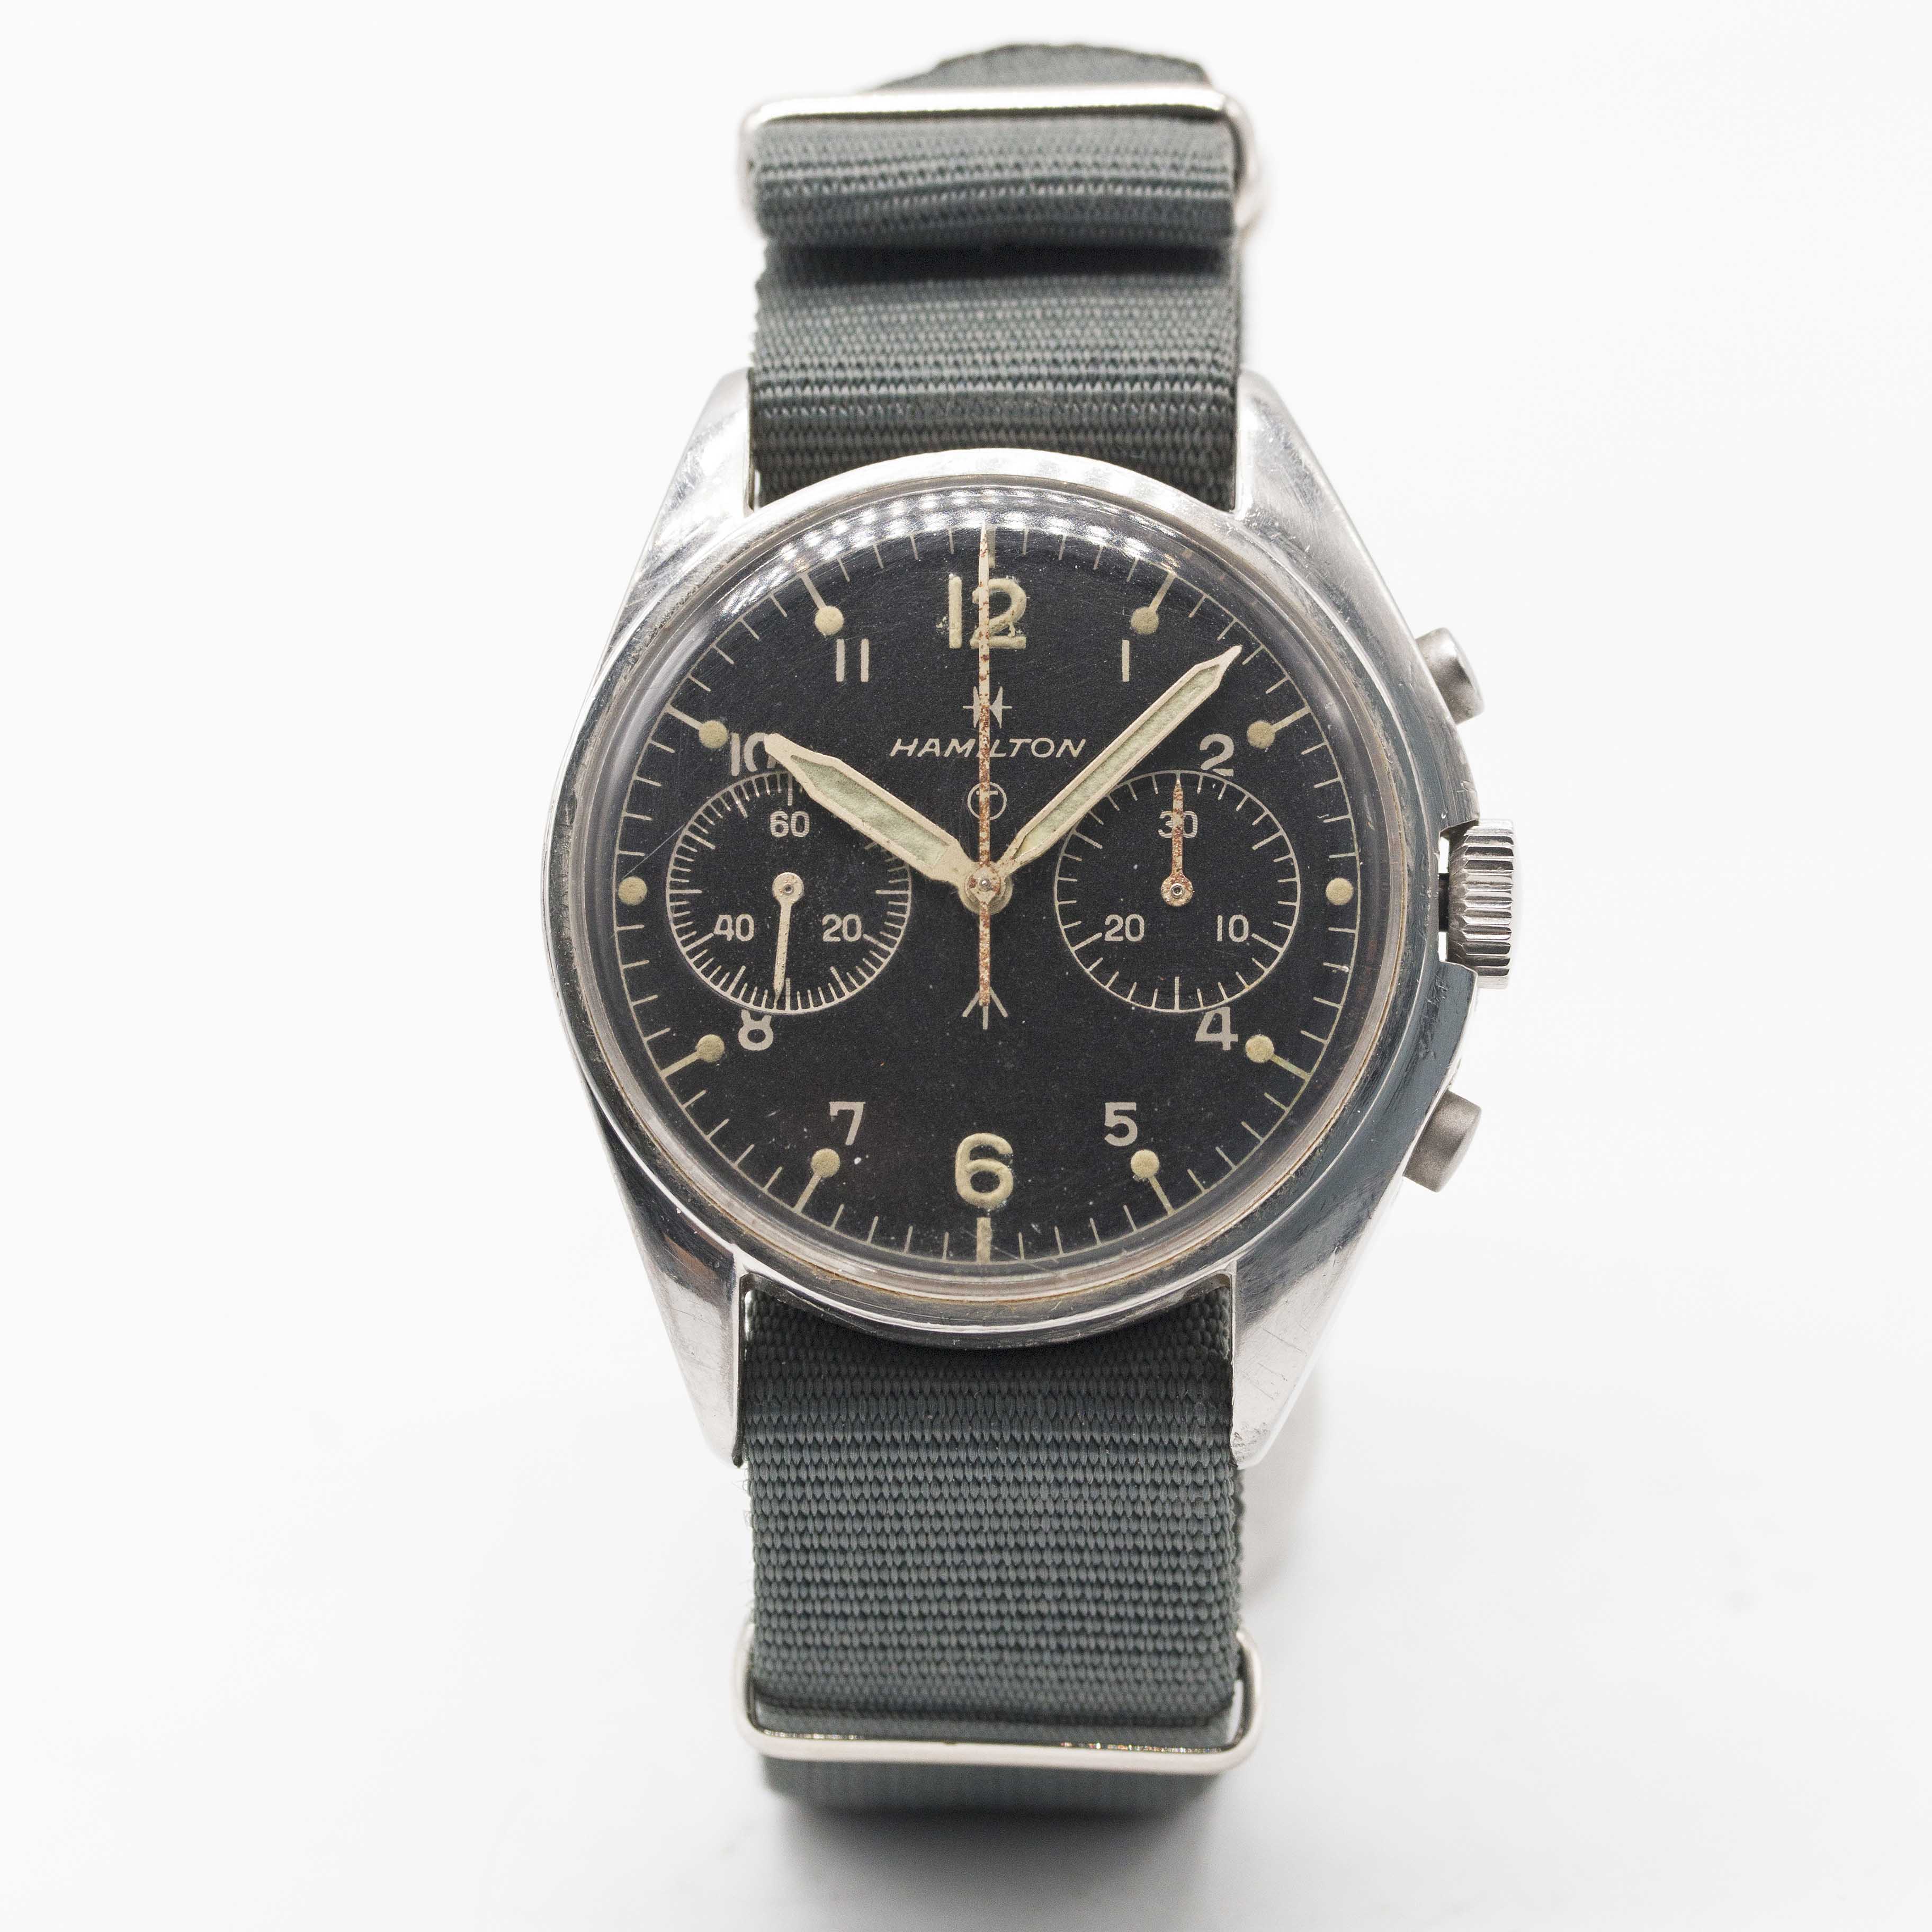 A COMPLETE SET OF GENTLEMAN'S STAINLESS STEEL BRITISH MILITARY "FAB FOUR" RAF PILOTS CHRONOGRAPH - Image 6 of 8